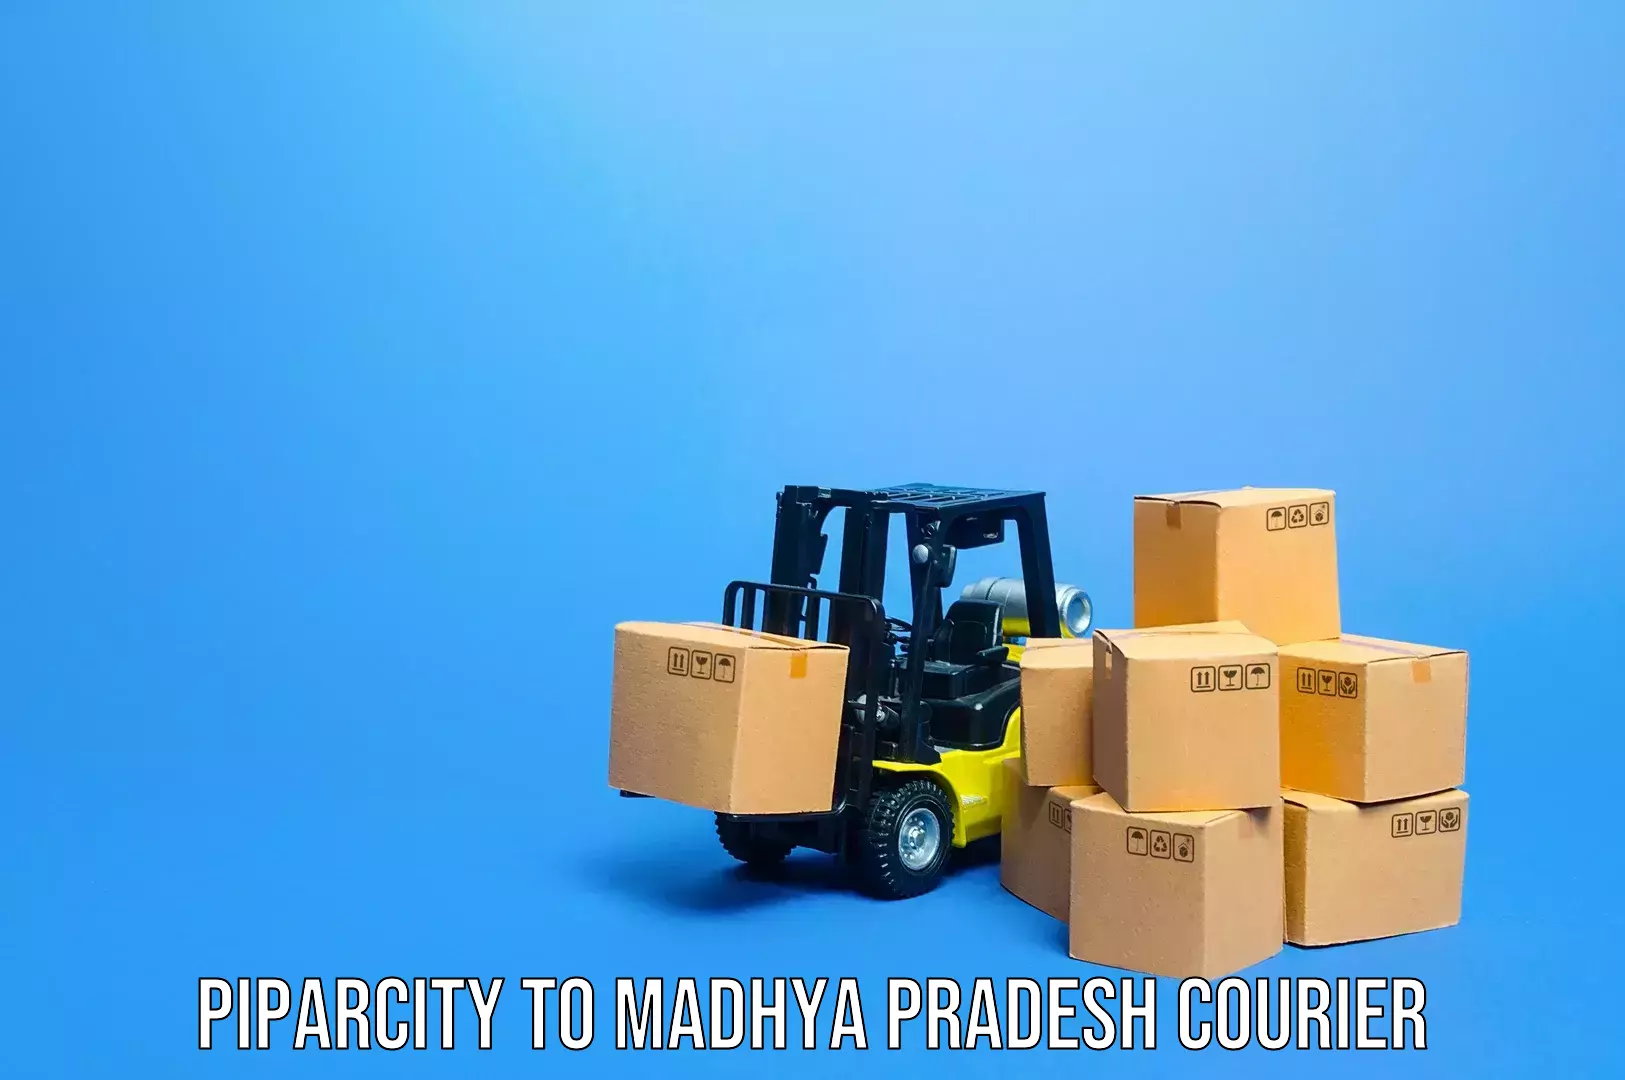 Luggage transport deals Piparcity to Udaipura